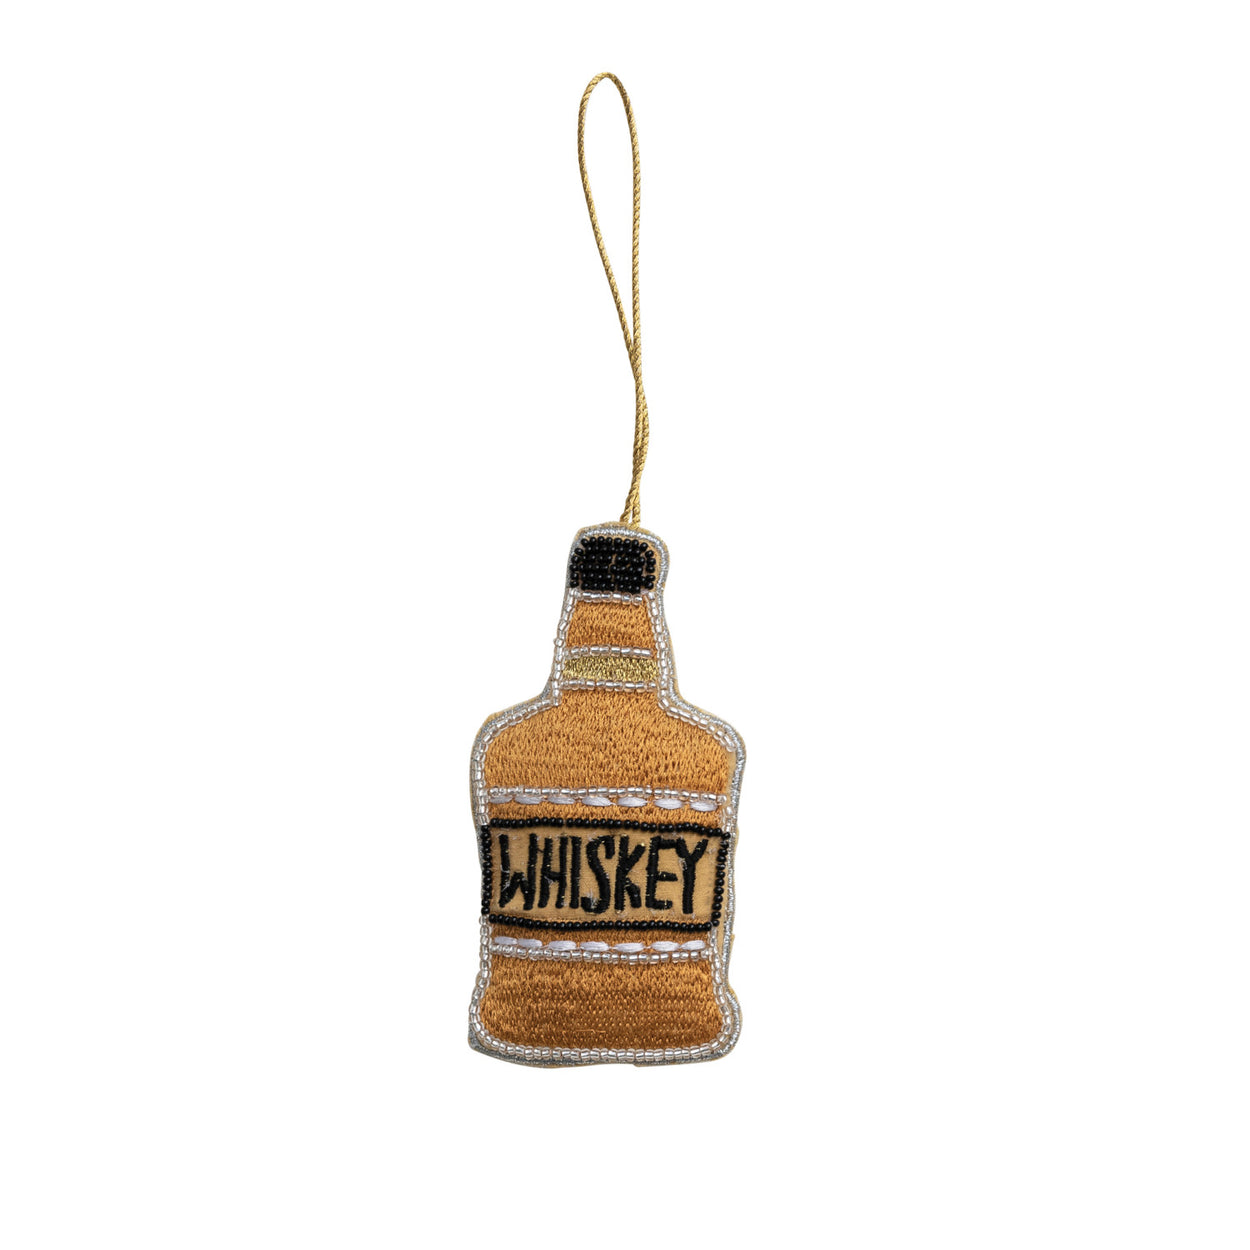 Fabric Whiskey Bottle Ornament With Embroidery & Beads